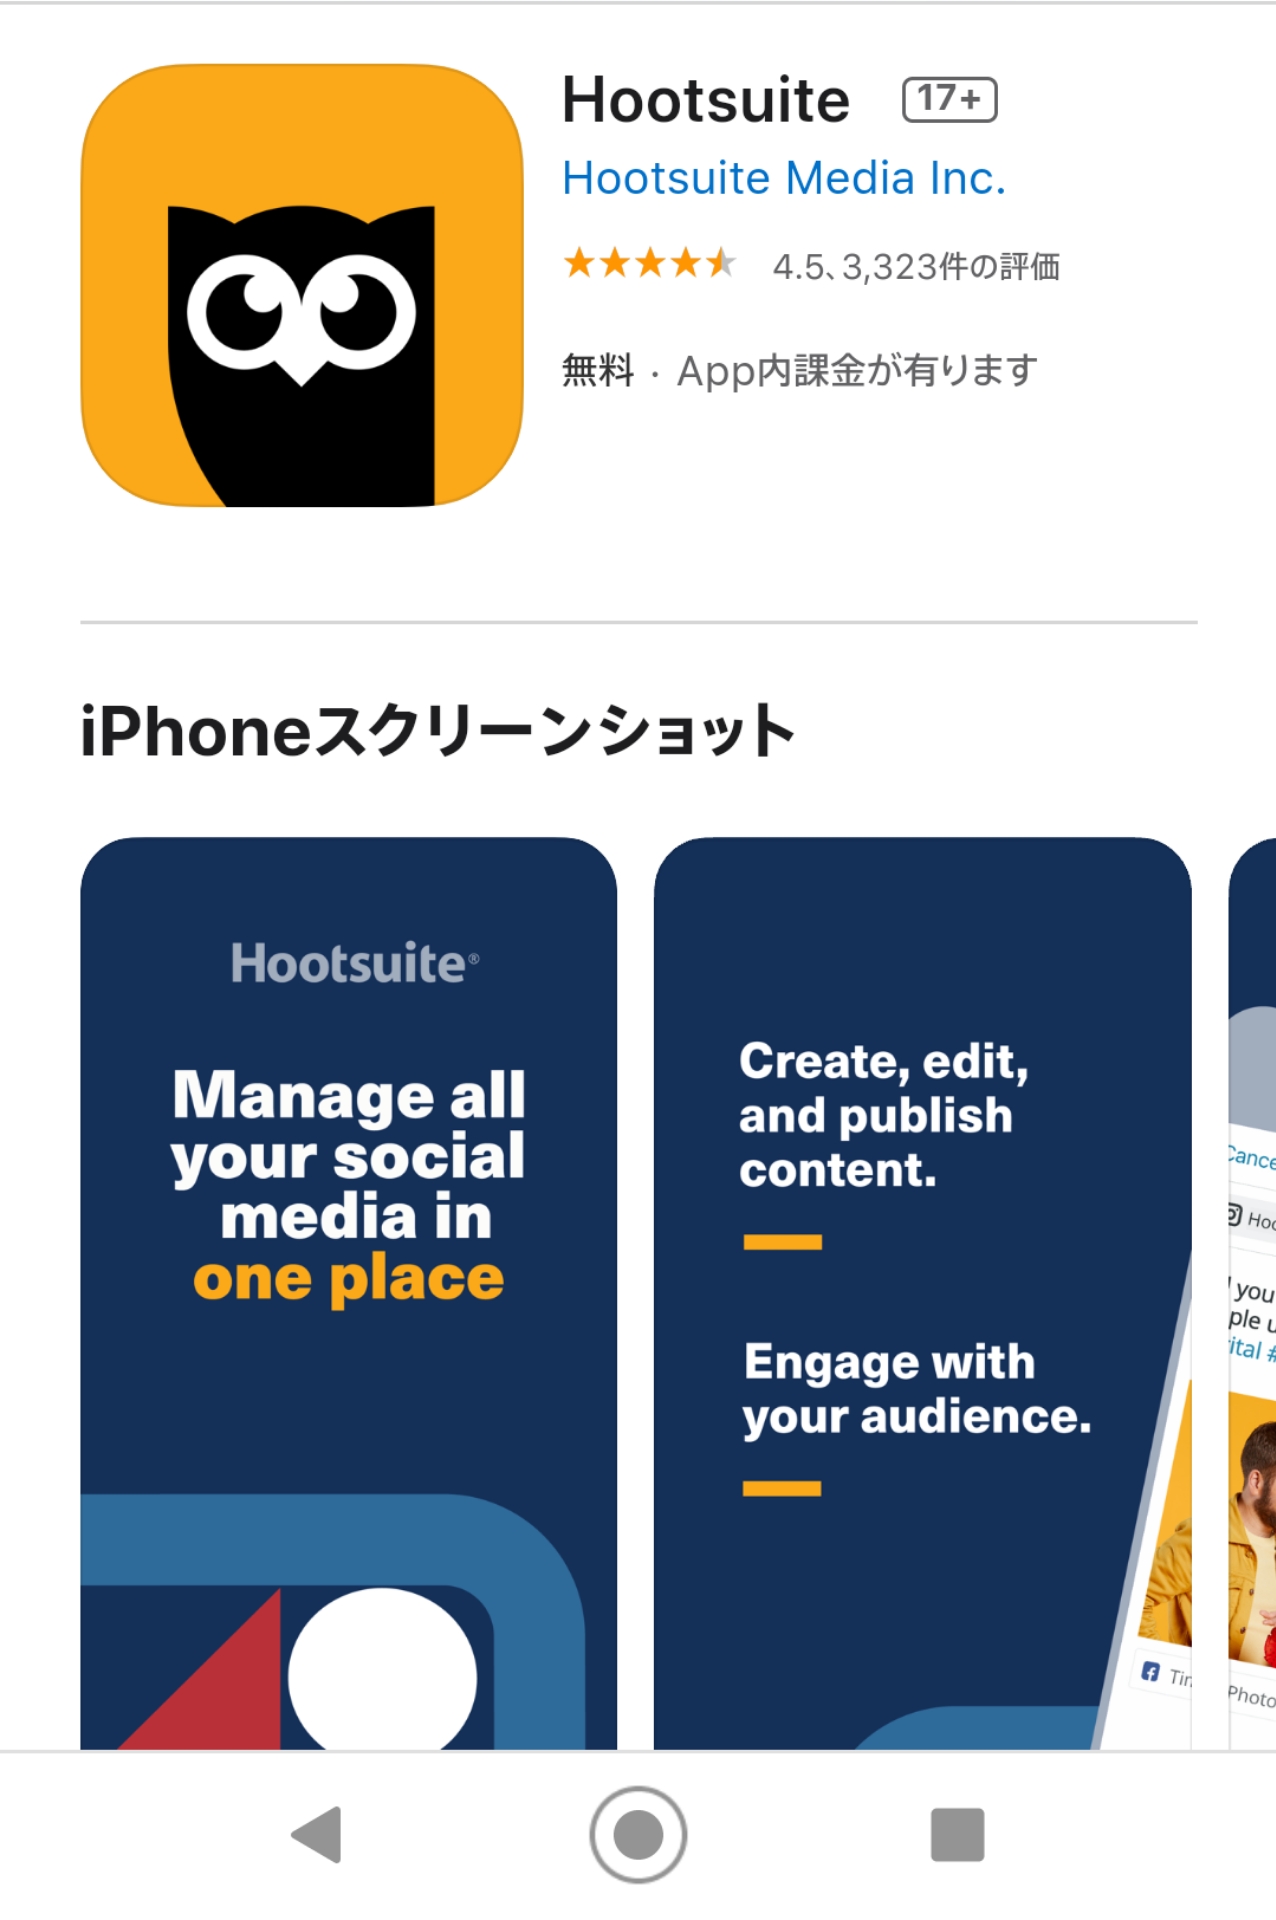 Hootsuite　App store　インストール　iPhone